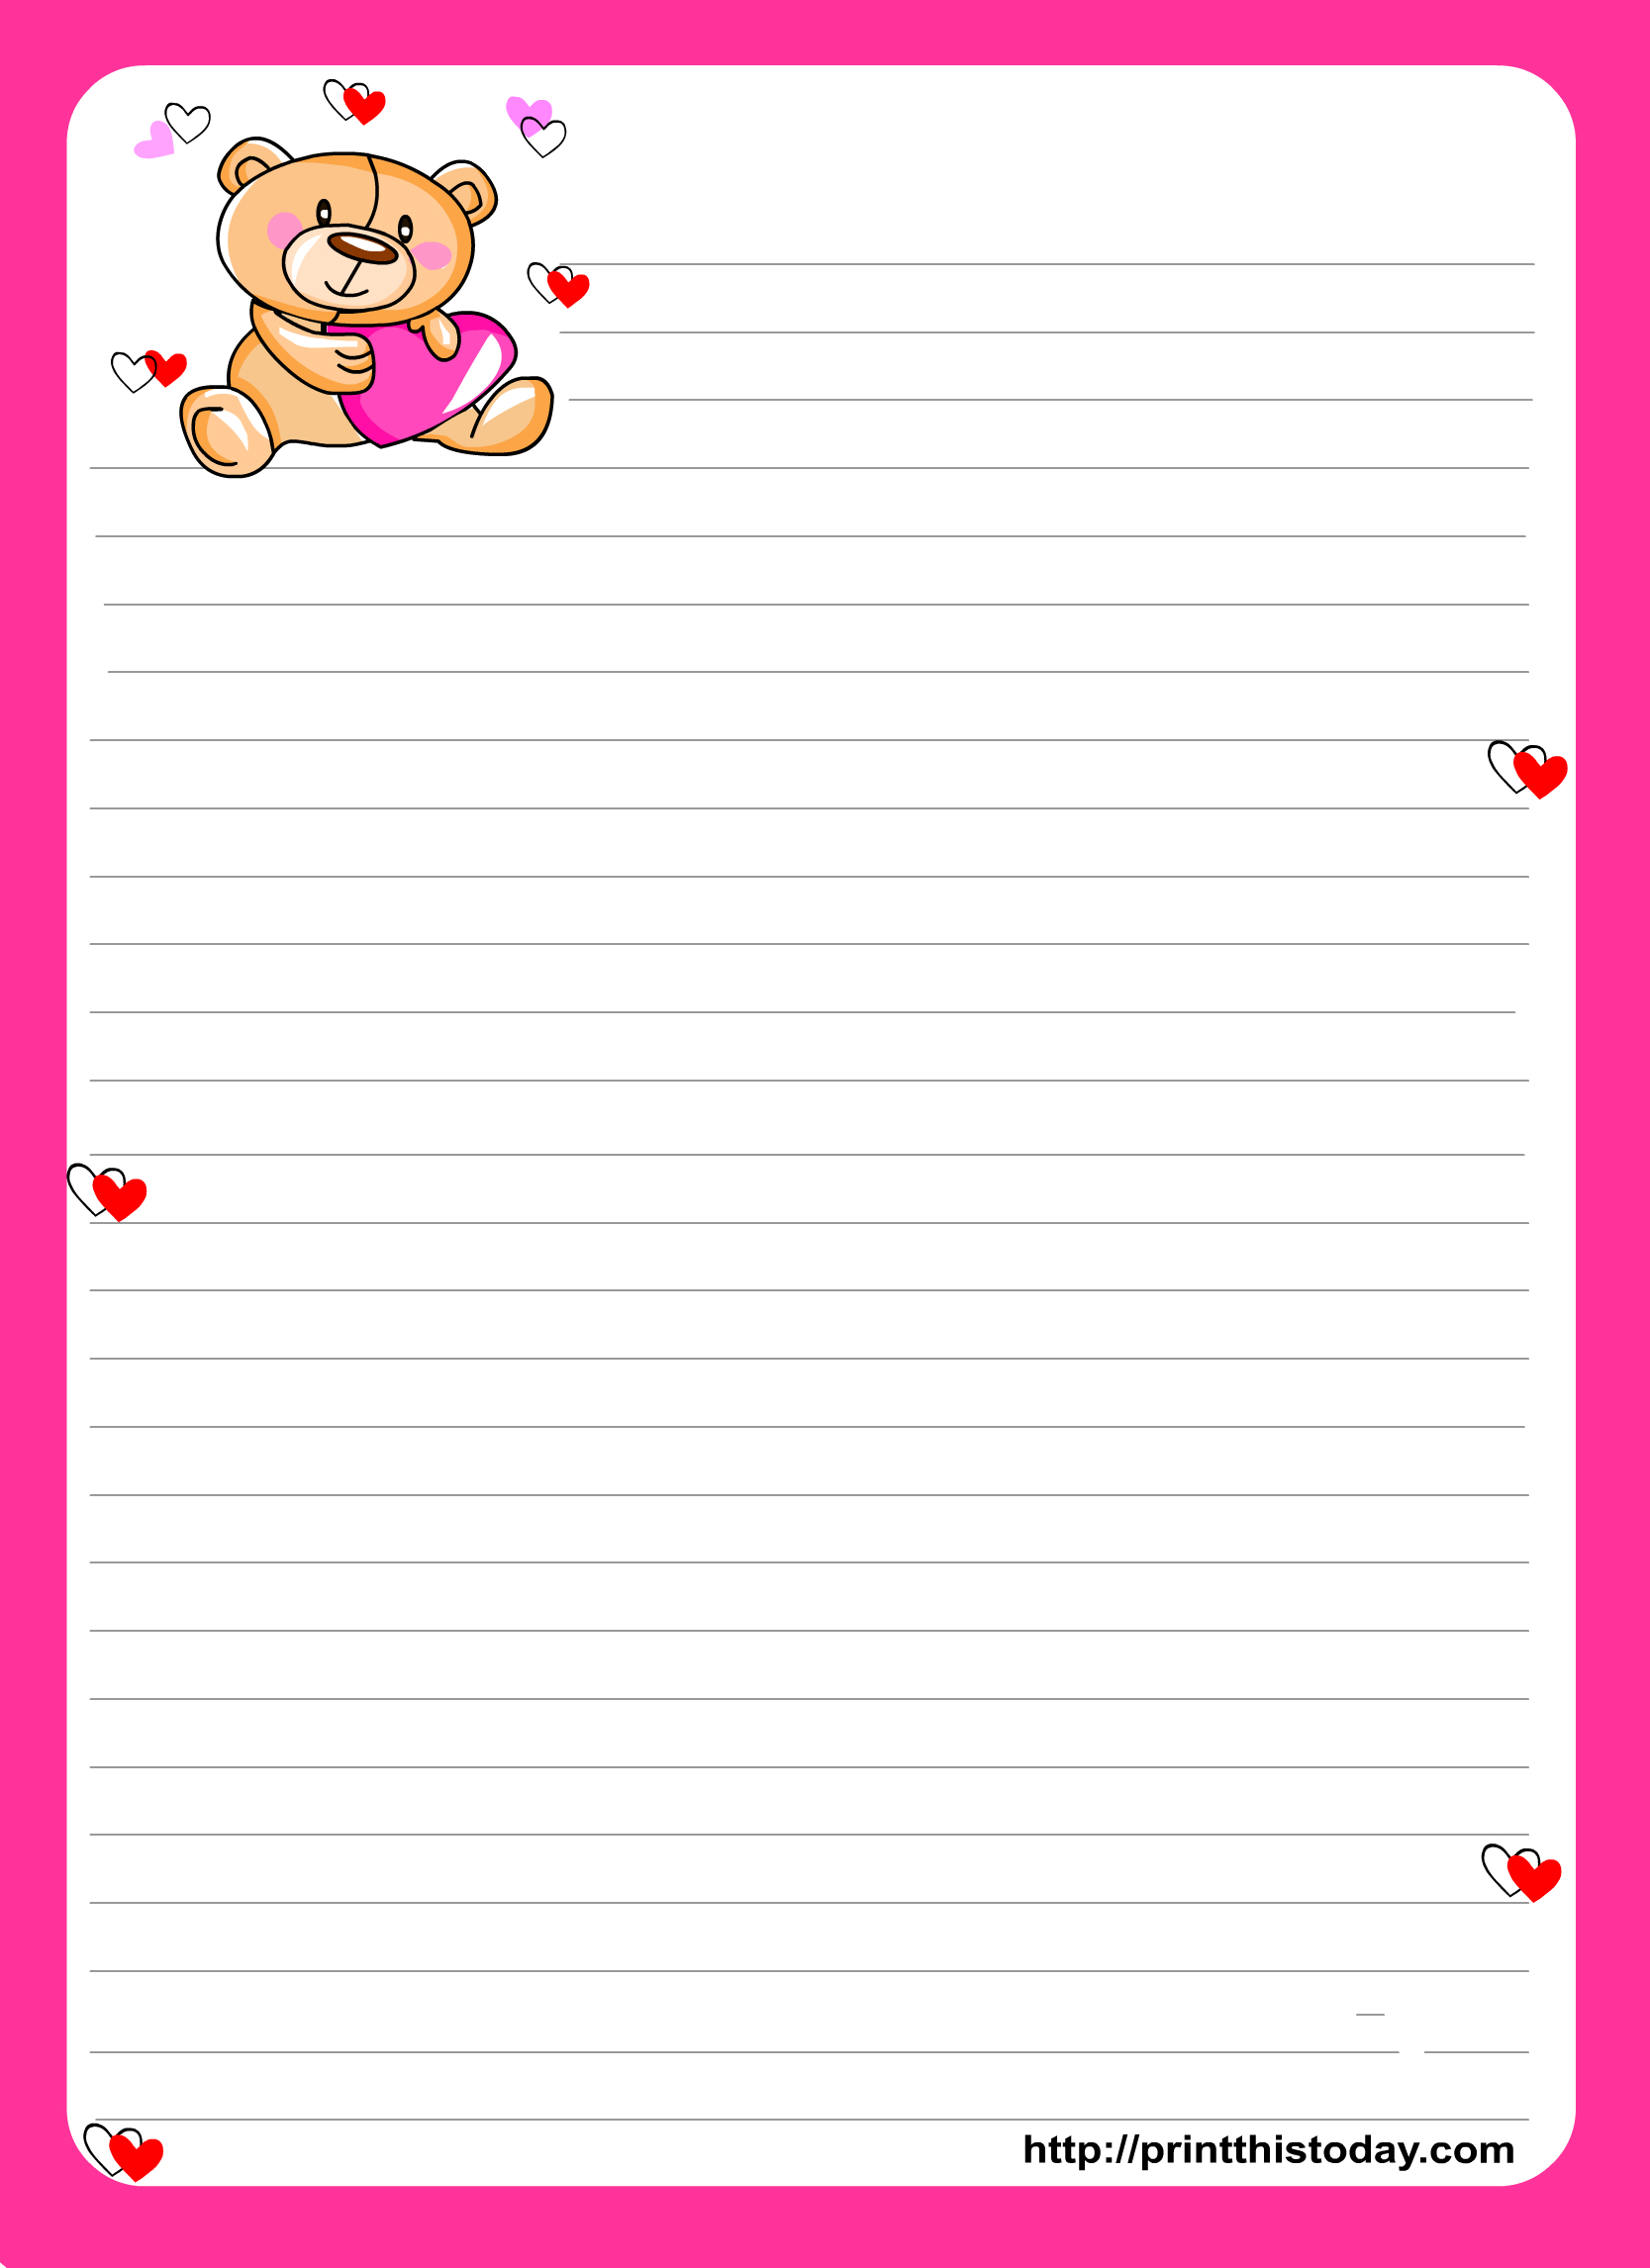 Printable Stationery Paper - Google Search | Stationery - Printables - Free Printable Stationery Paper